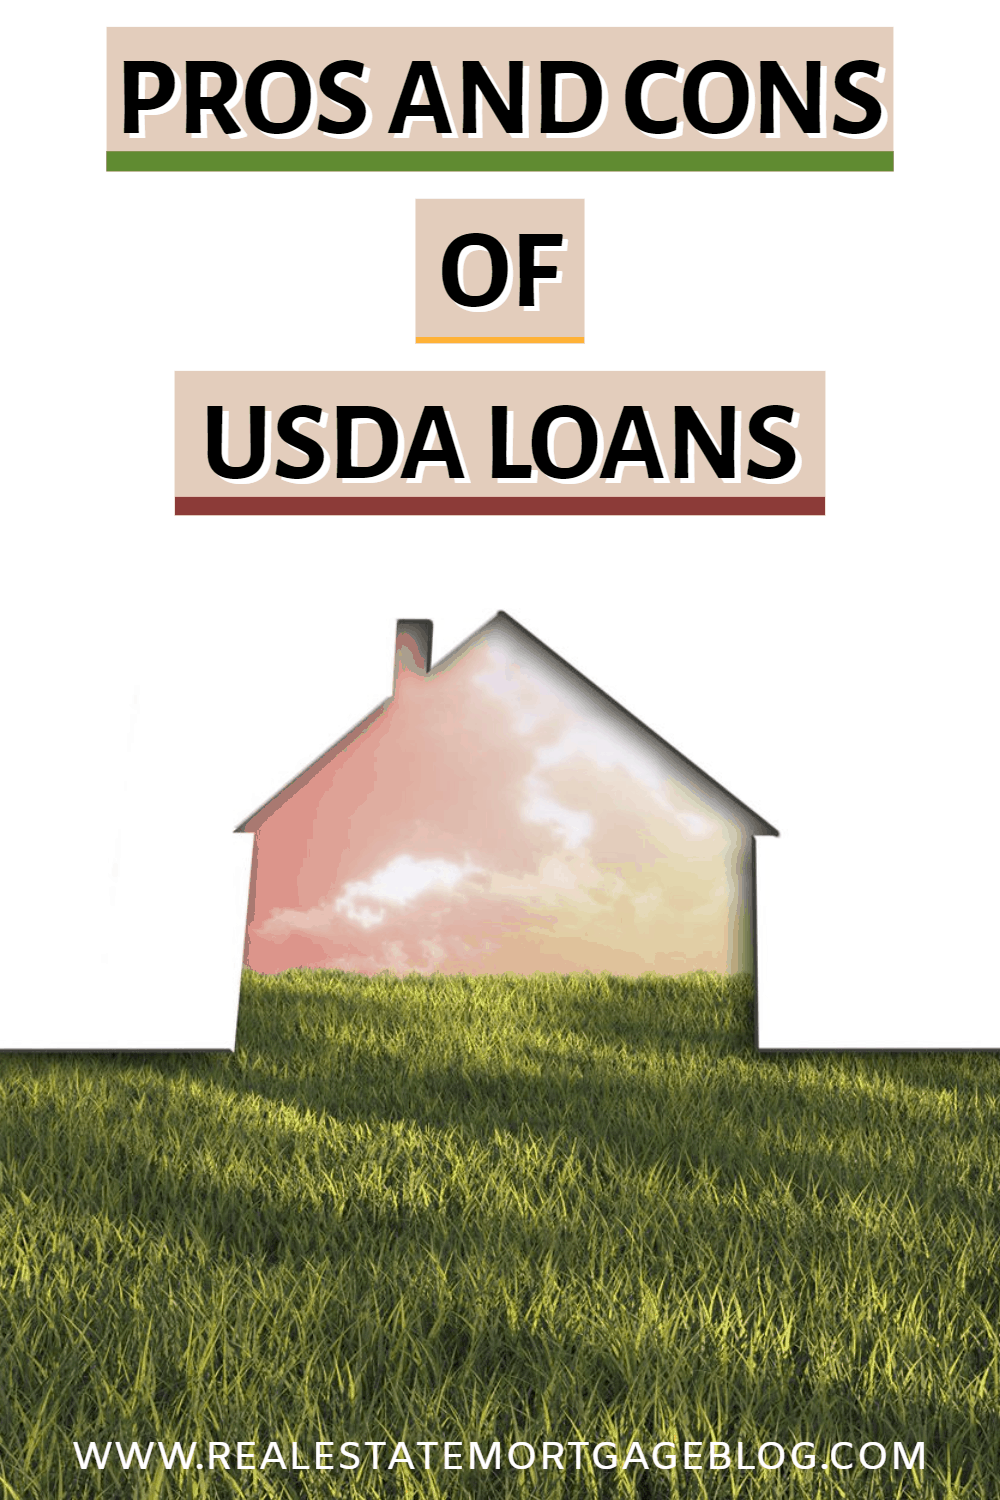 Pros and Cons of USDA Loans